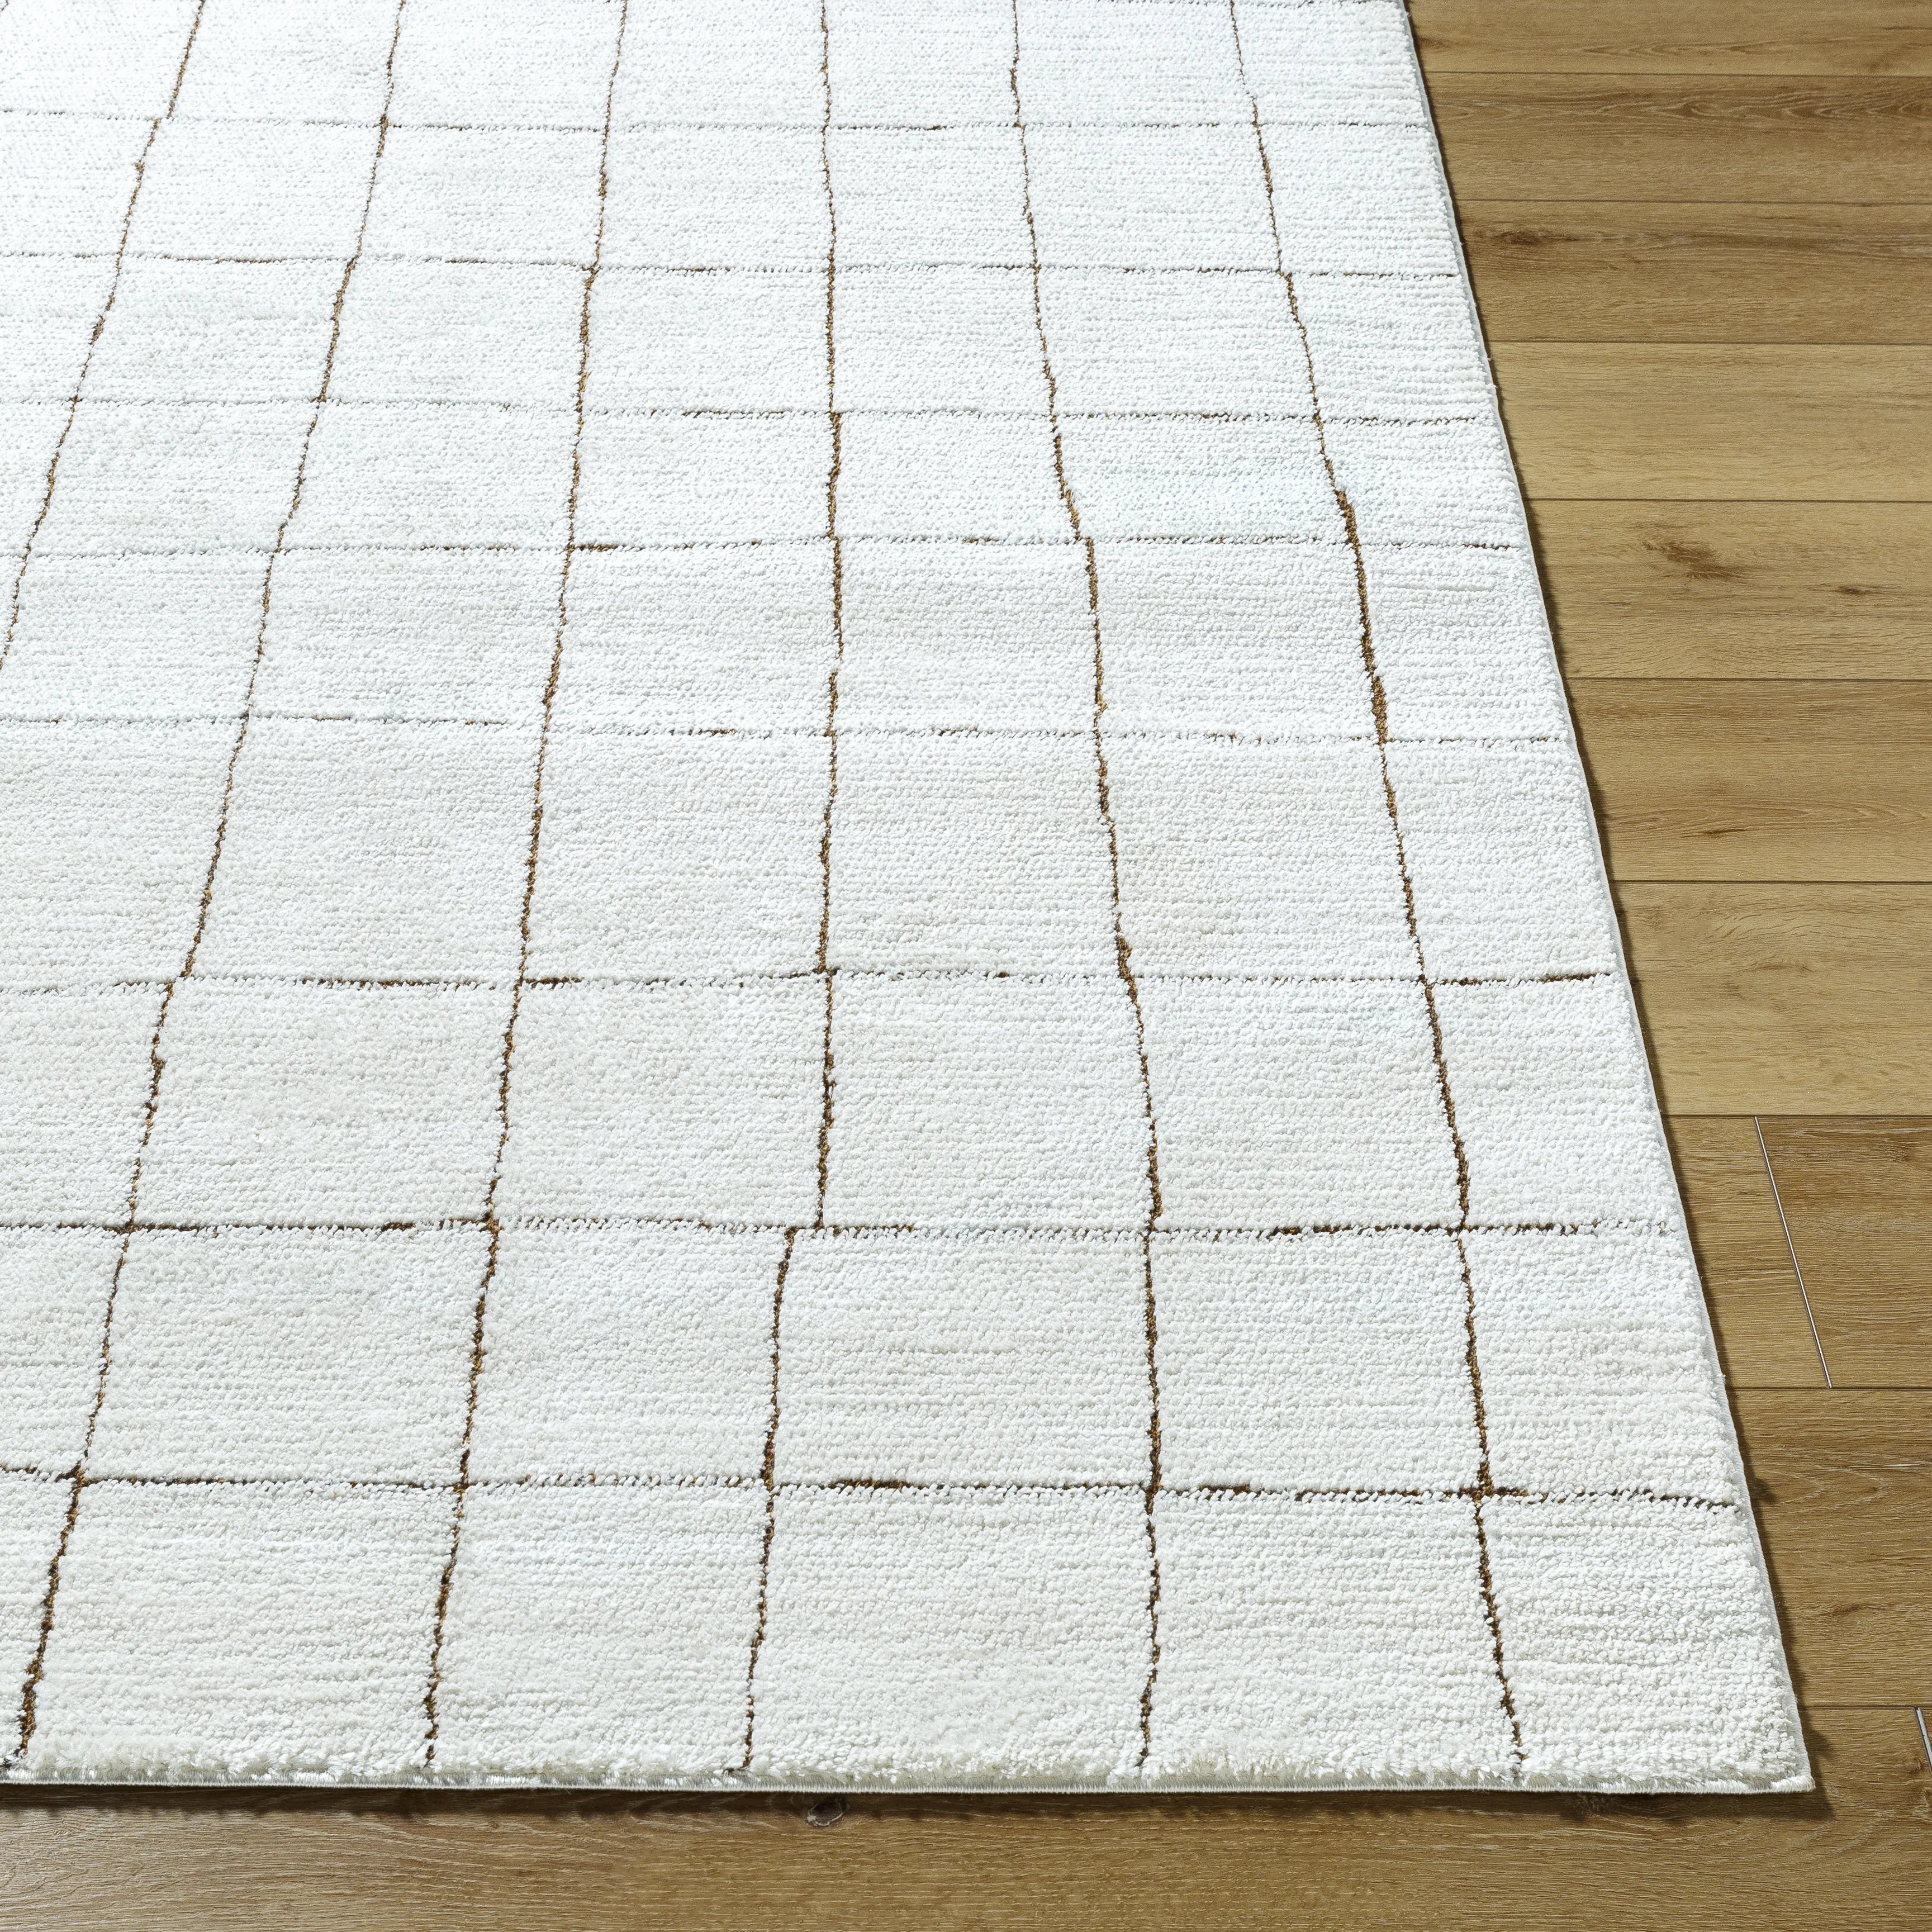 PNW Home x Surya available at Amethyst Home shipping to Australia, UK, and Canada. Organic modern design with easy to clean rugs for a family home in  the Austin metro area.